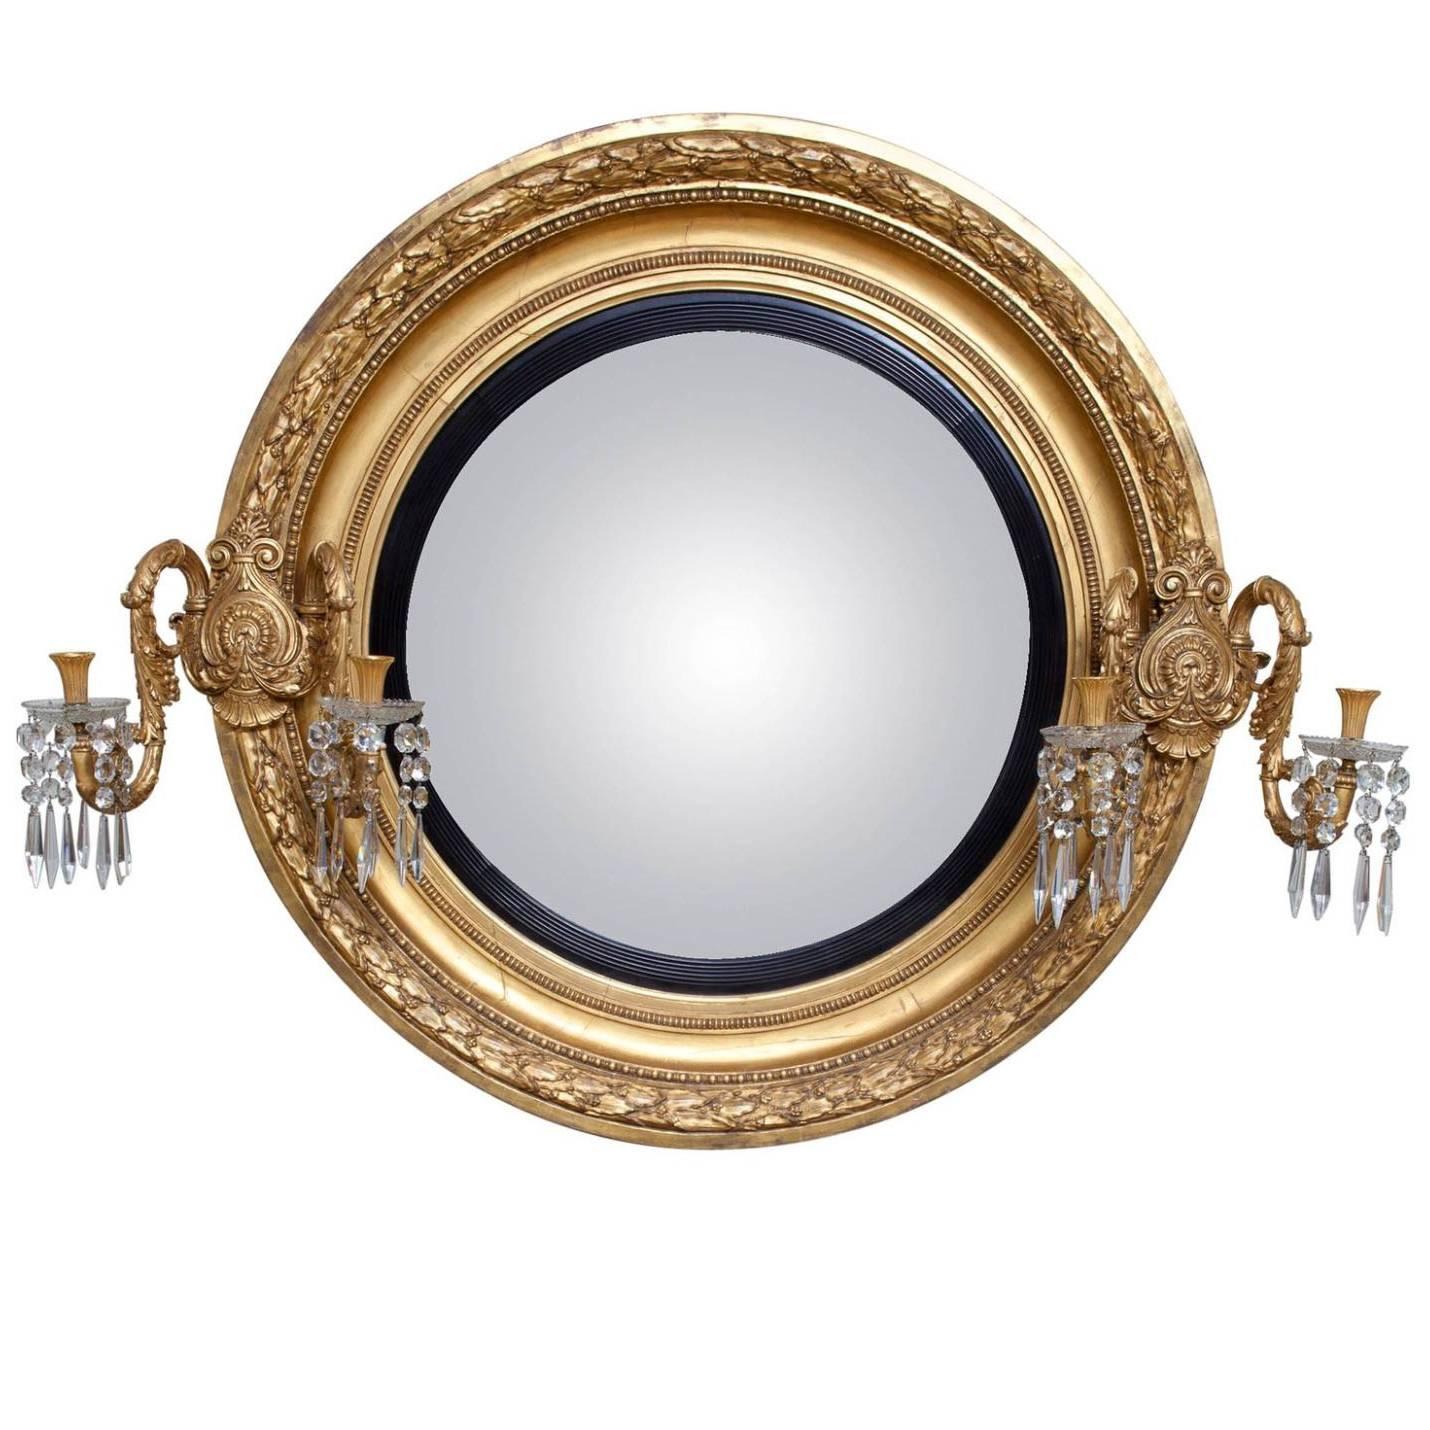 Early 19th Century Monumental Regency Giltwood Convex Mirror For Sale